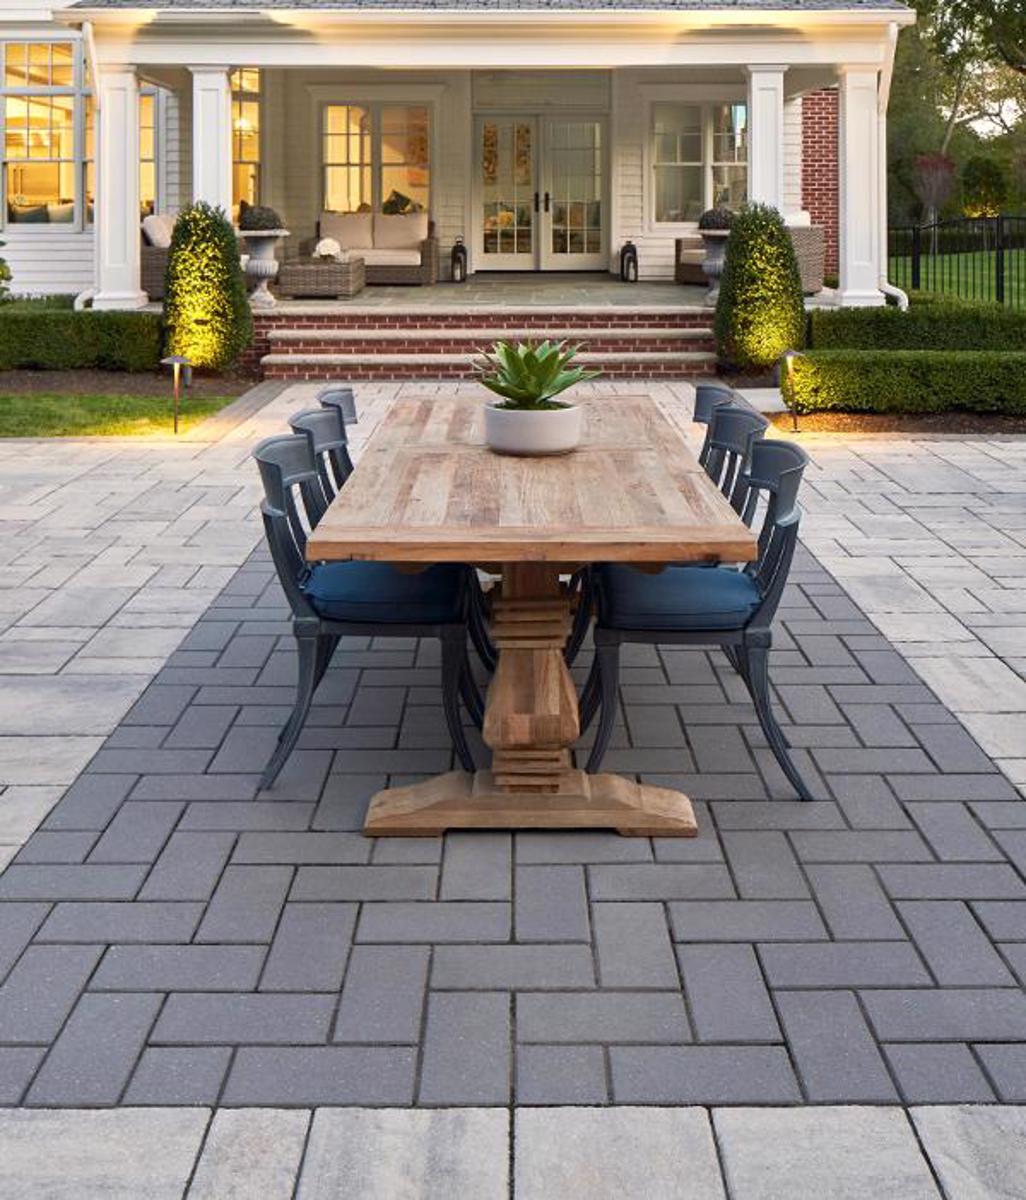 Techo bloc by style backyard patio dining table slabs pavers grey black traditional 4